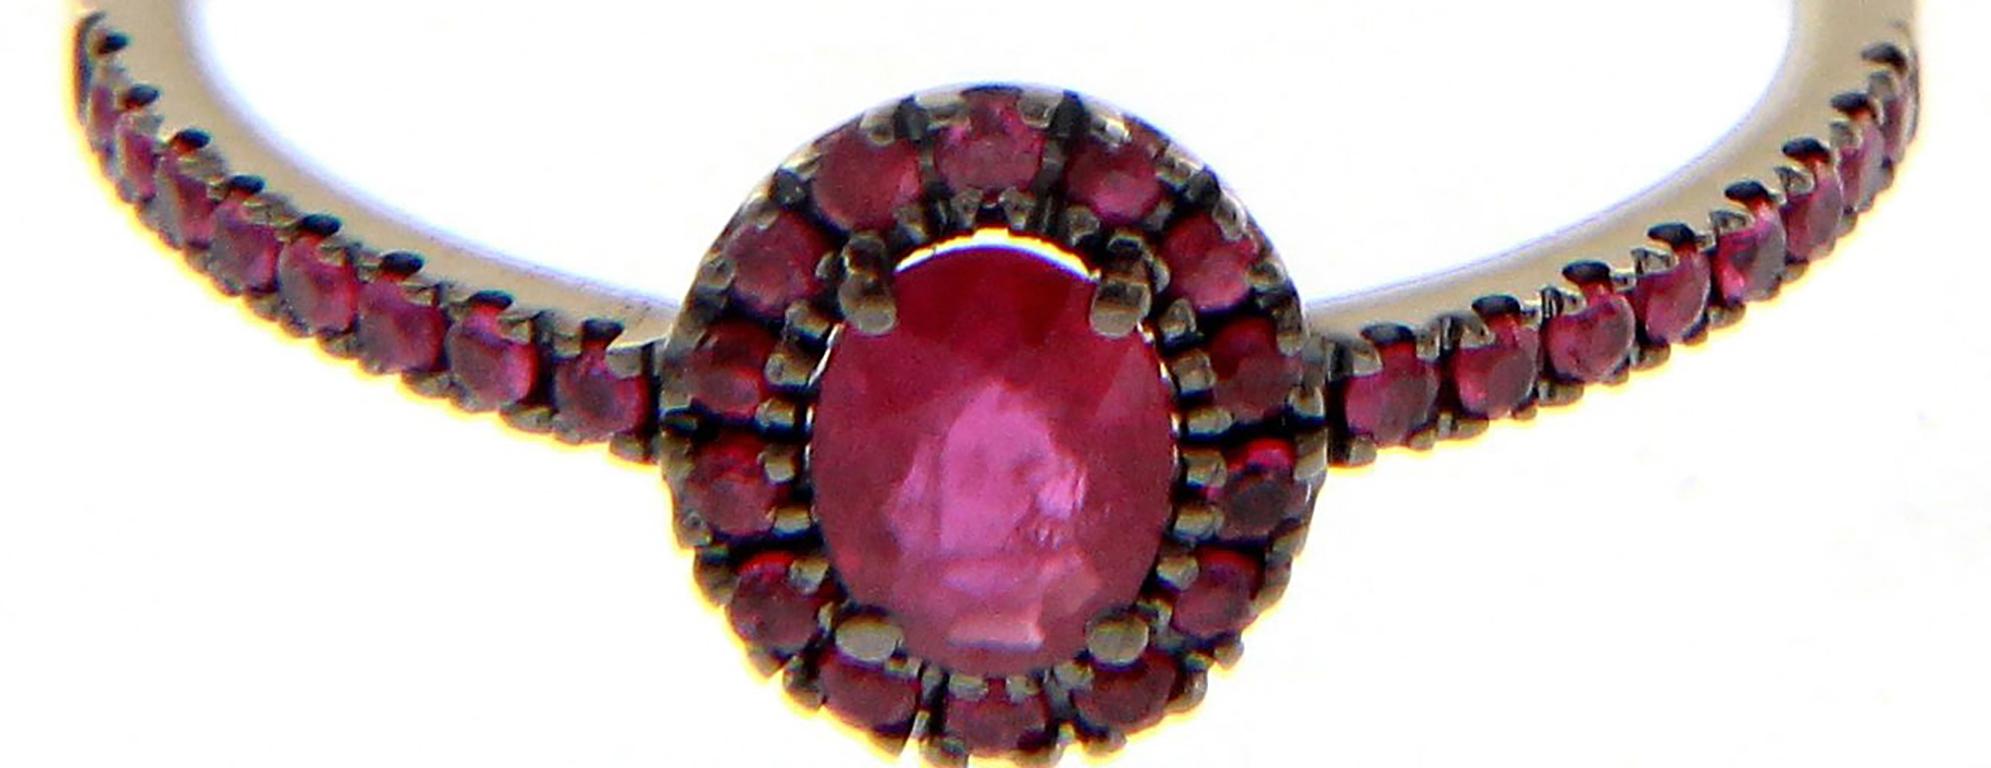 For Sale:  18k Black and White Golg Wedding Ring with Ruby 2